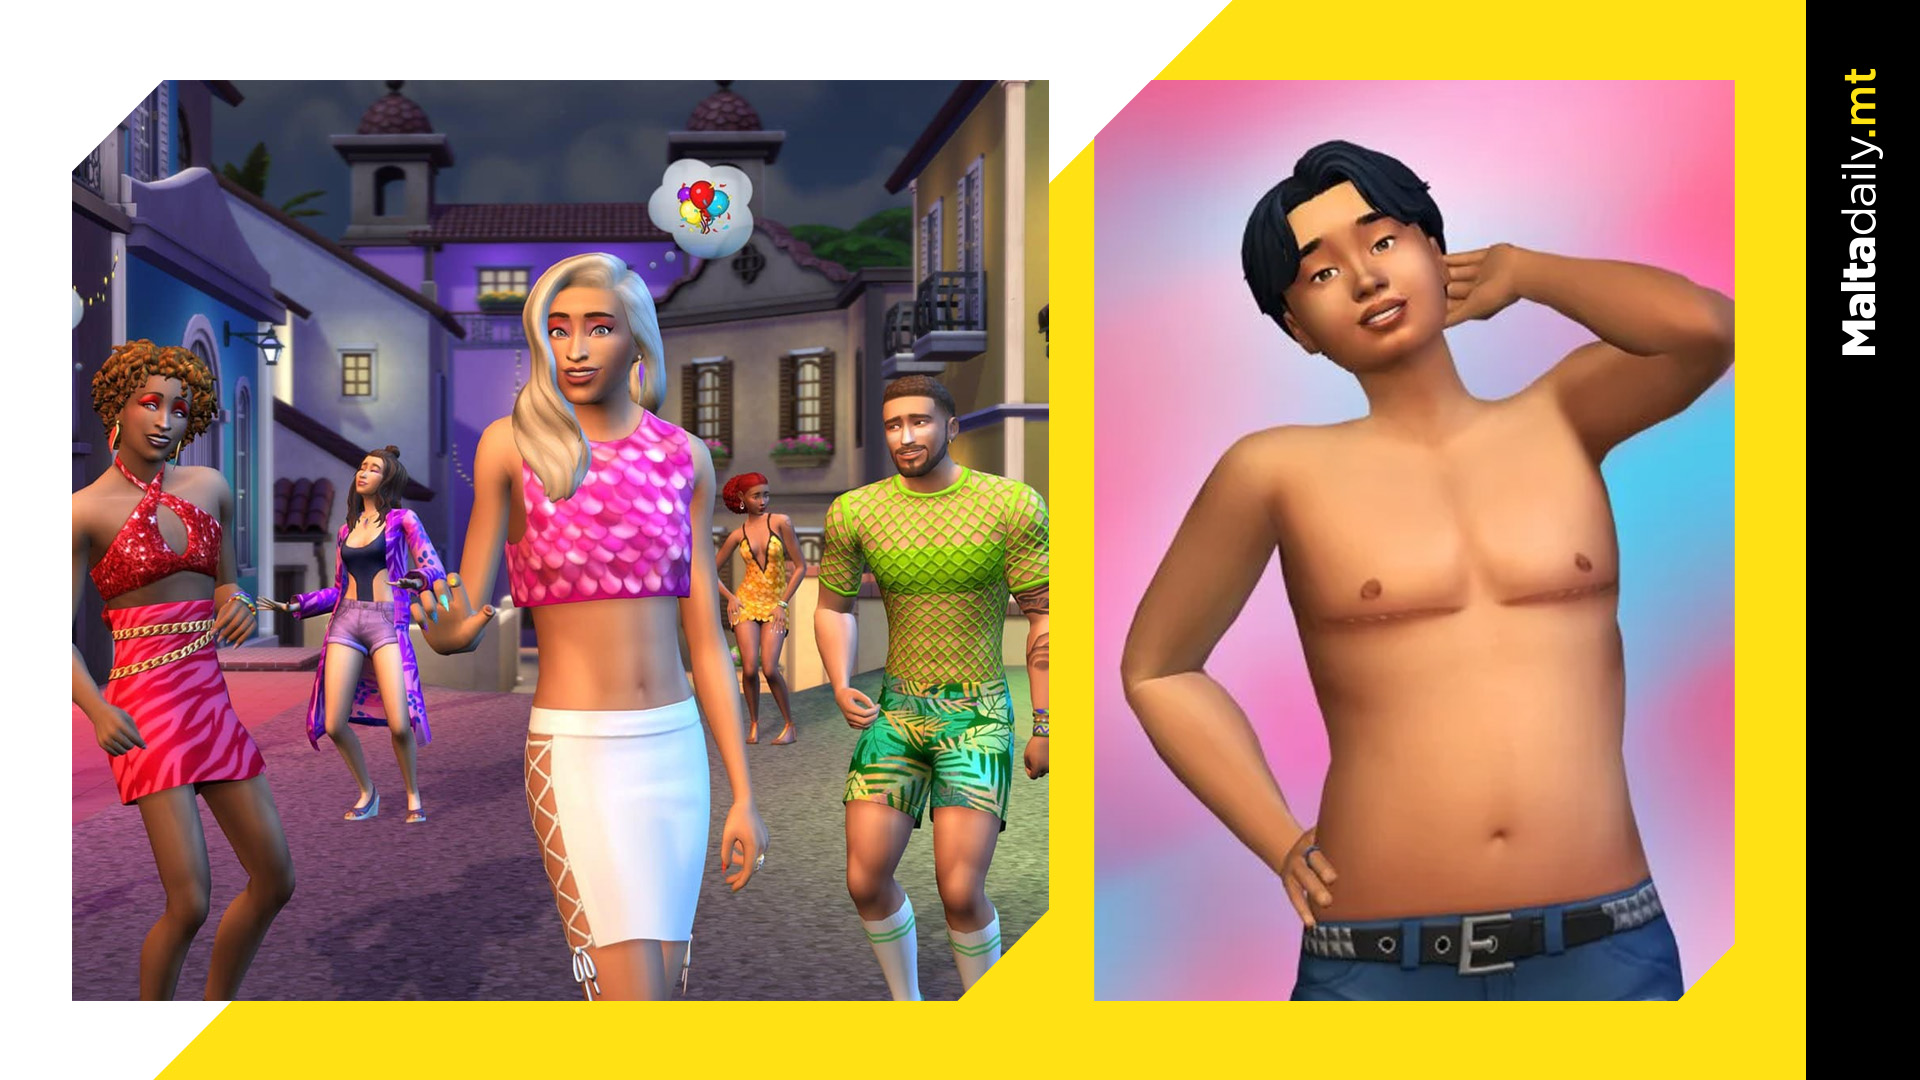 The Sims introduces trans-inclusive characters with top surgery scars & chest binders